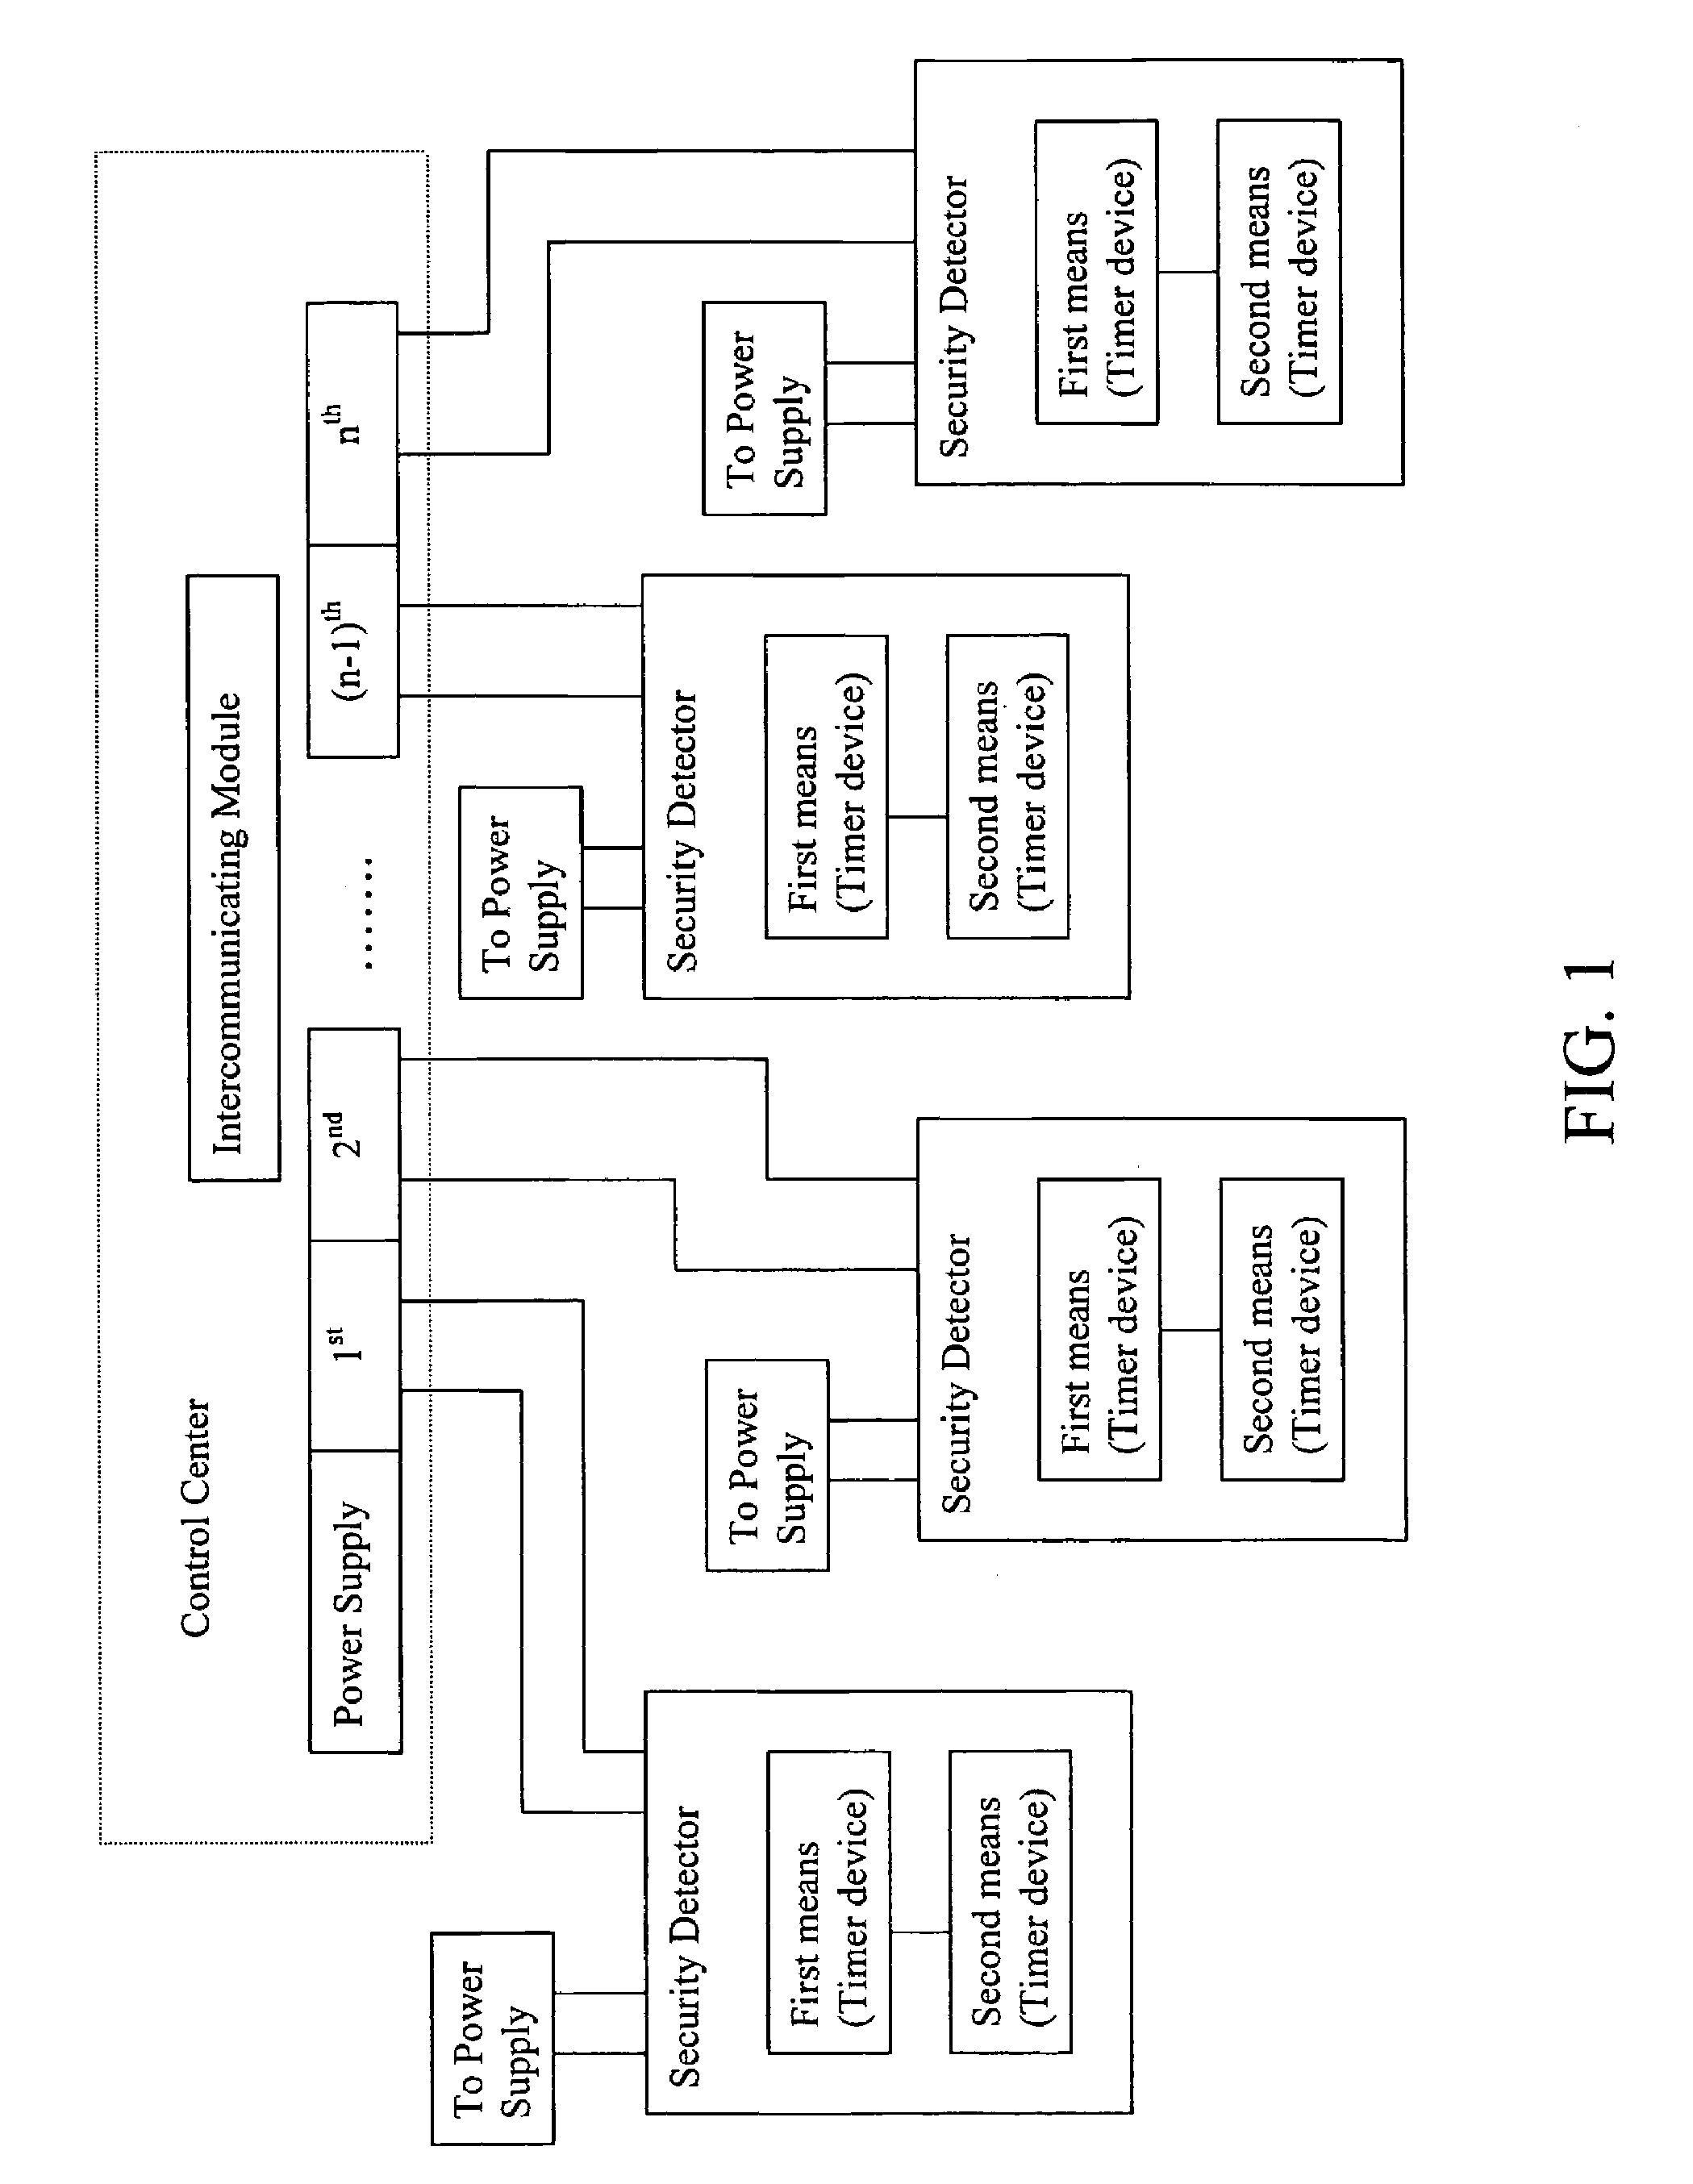 Security device with built-in intercommunicated false alarm reduction control